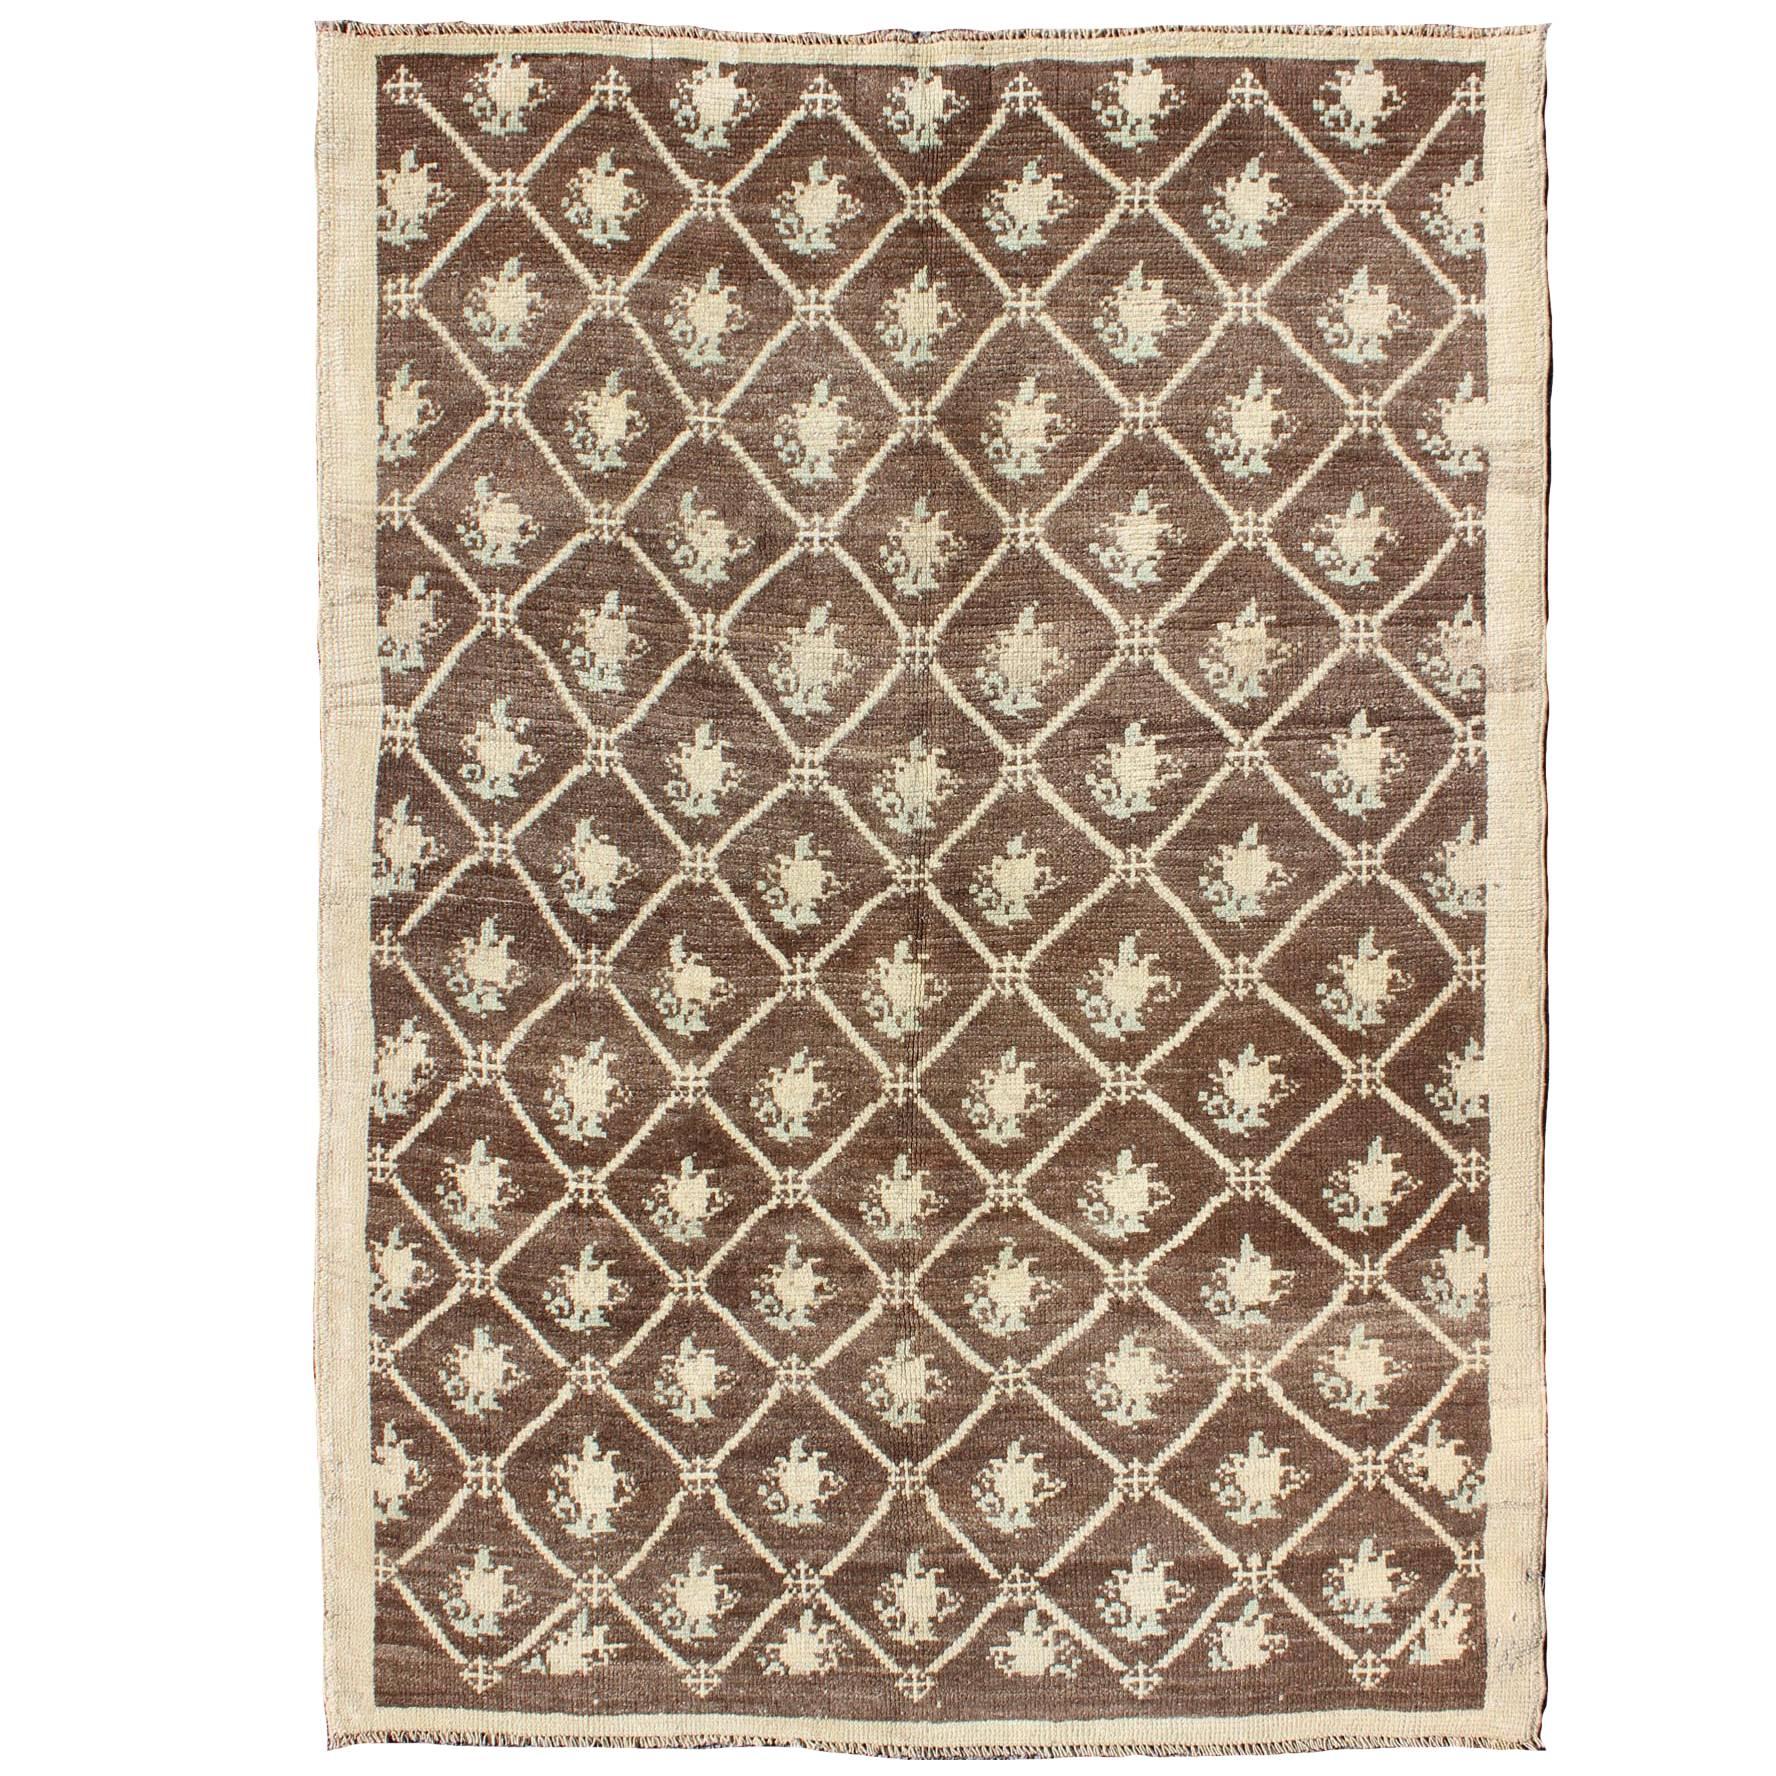 All-Over Design Turkish Tulu Carpet in Shades of Brown and Cream